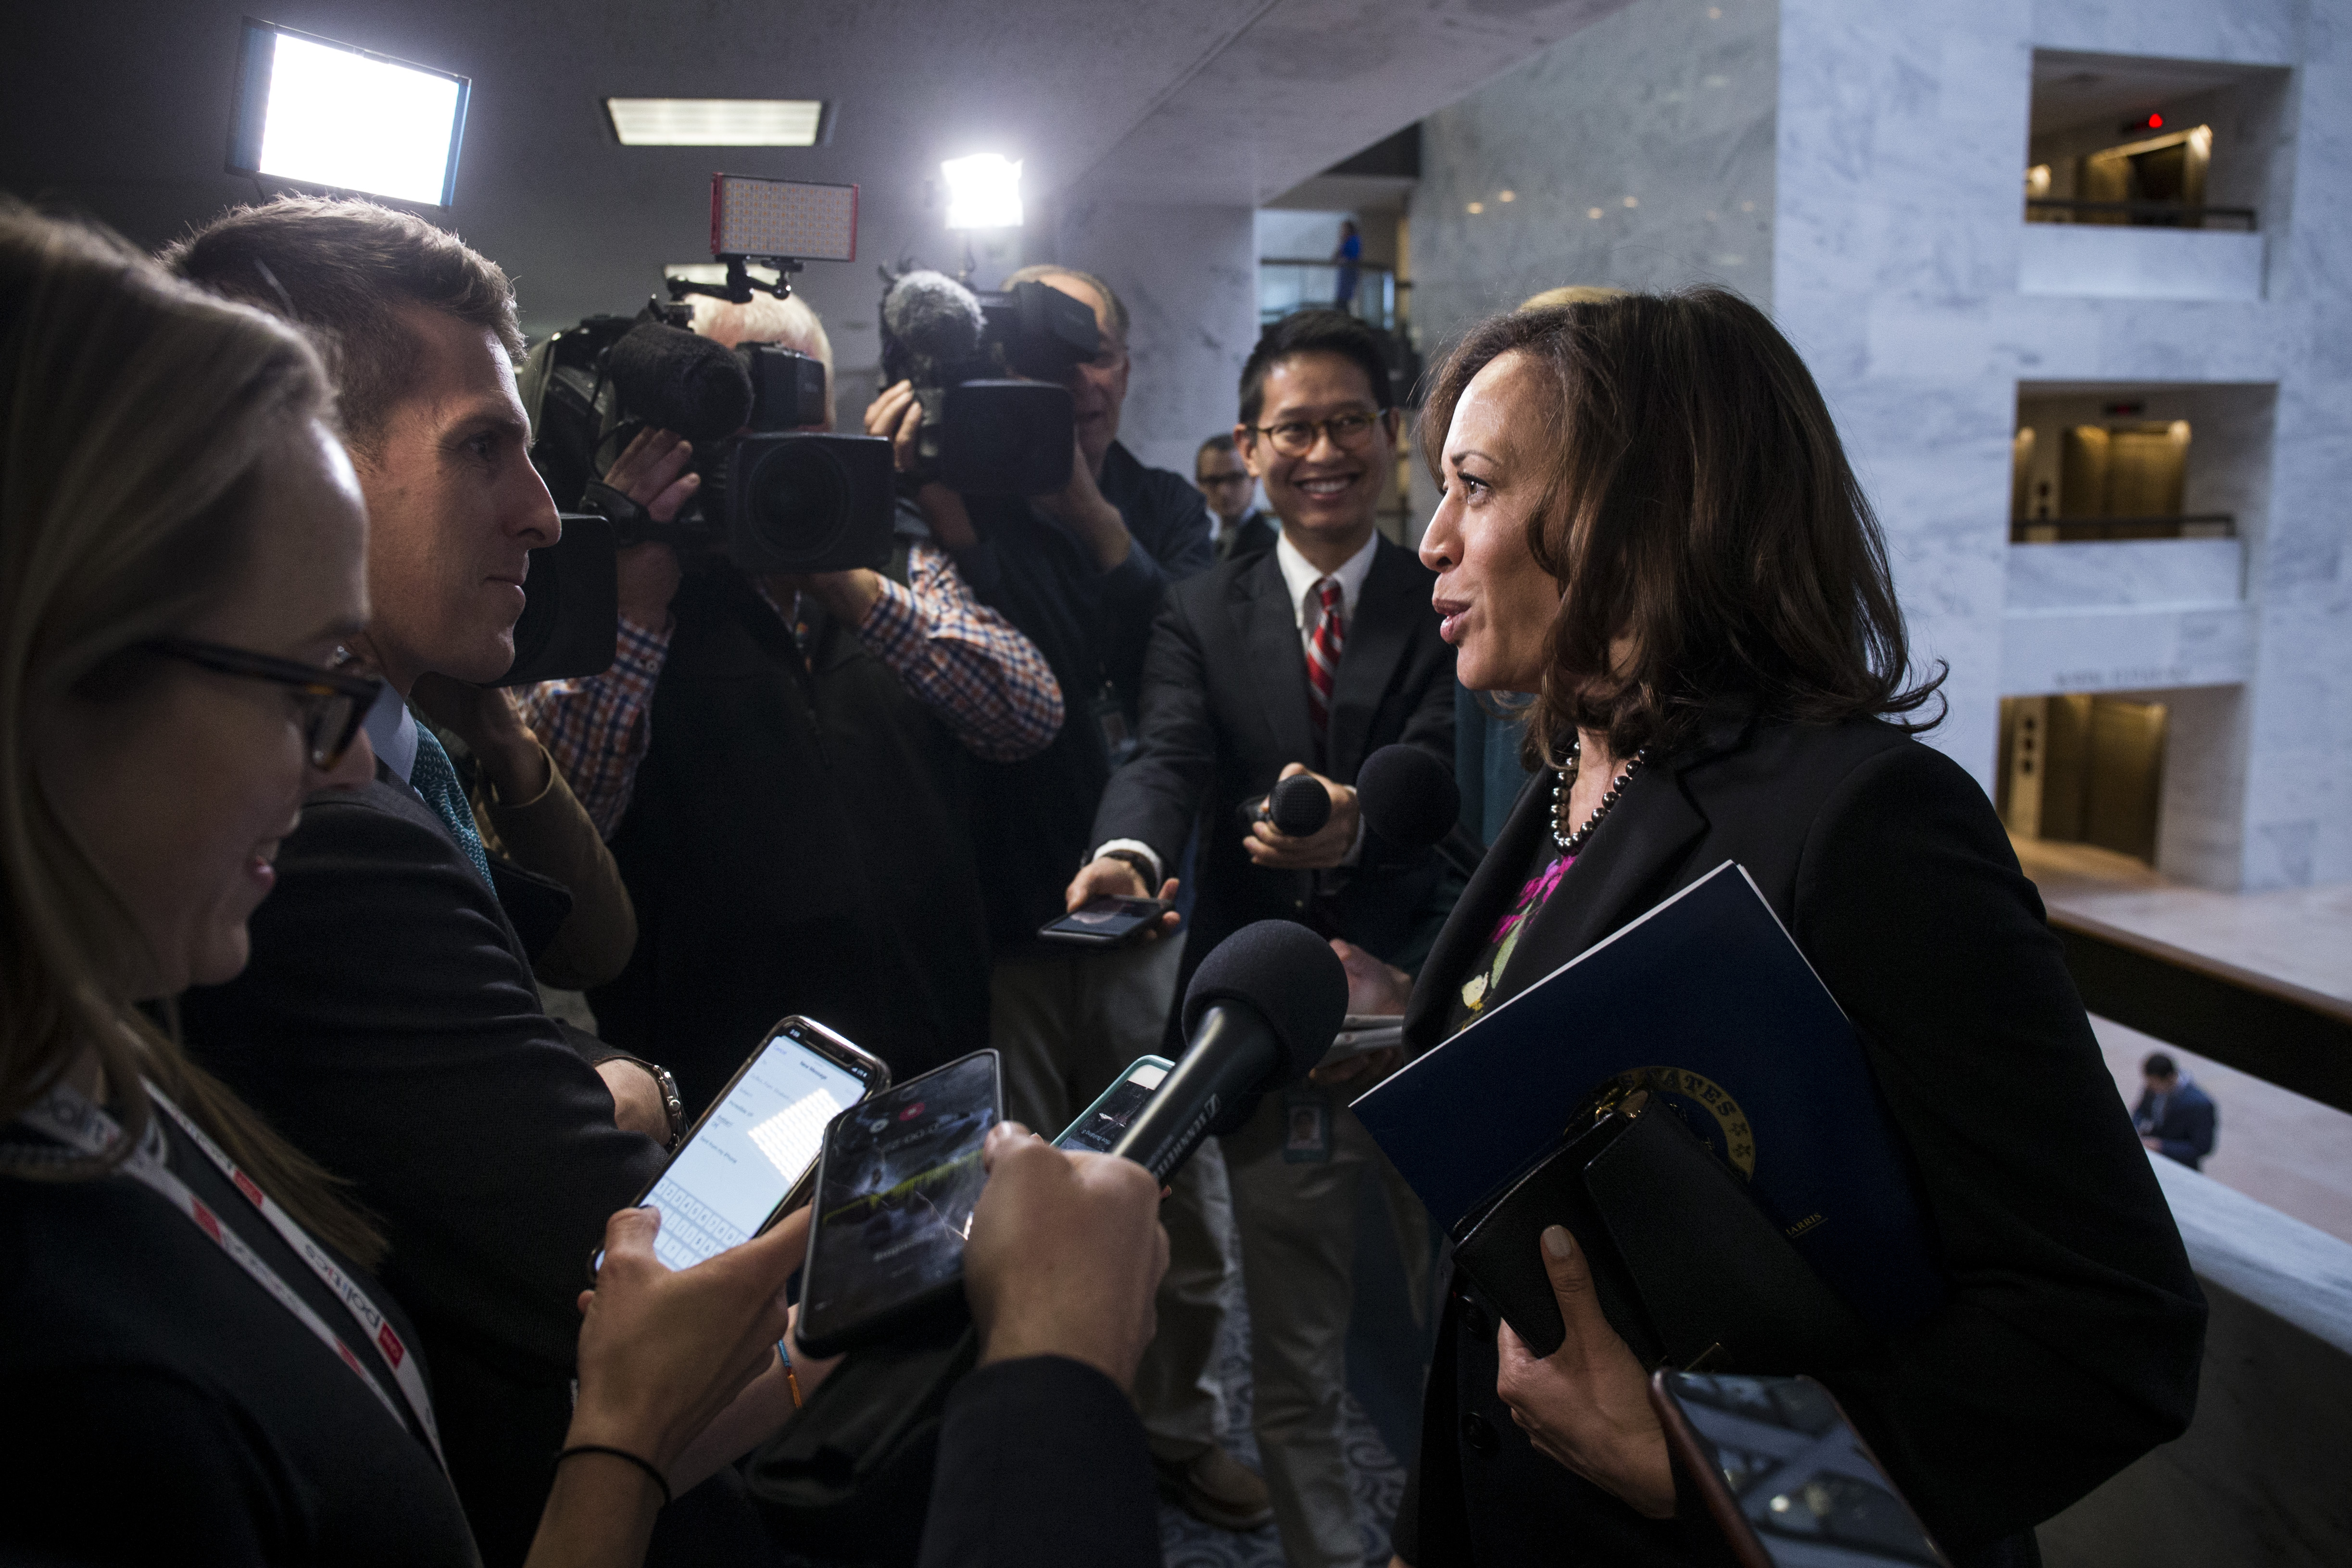 Sen. Kamala Harris speaks to reporters following a closed briefing on intelligence matters on Capitol Hill on December 4, 2018 in Washington, DC. (Photo by Zach Gibson/Getty Images)